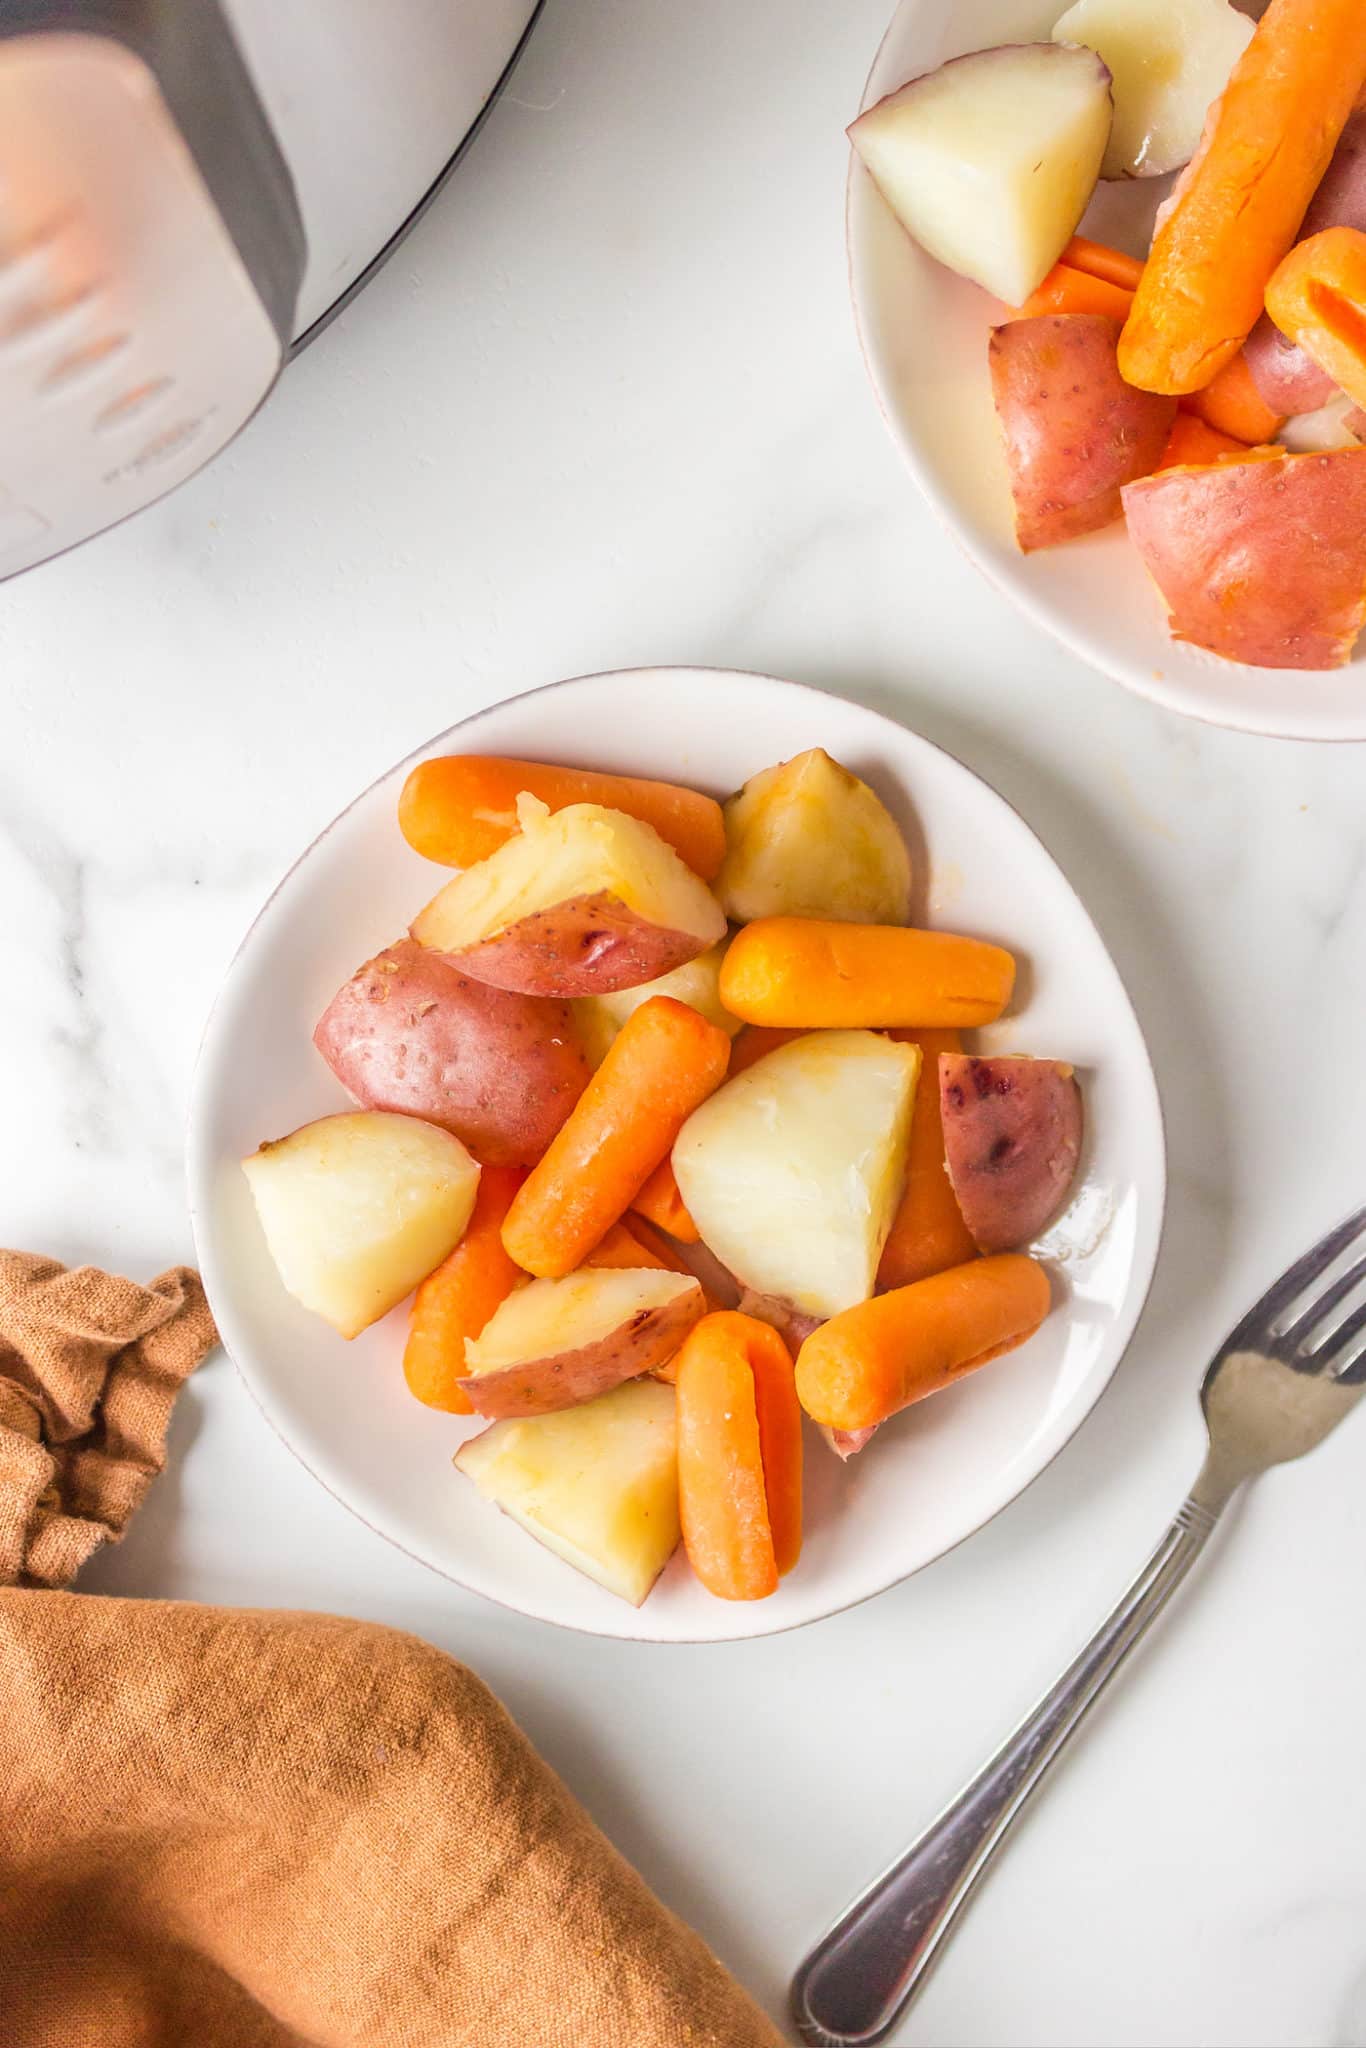 cooked instant pot potatoes and carrots served on a white plate.